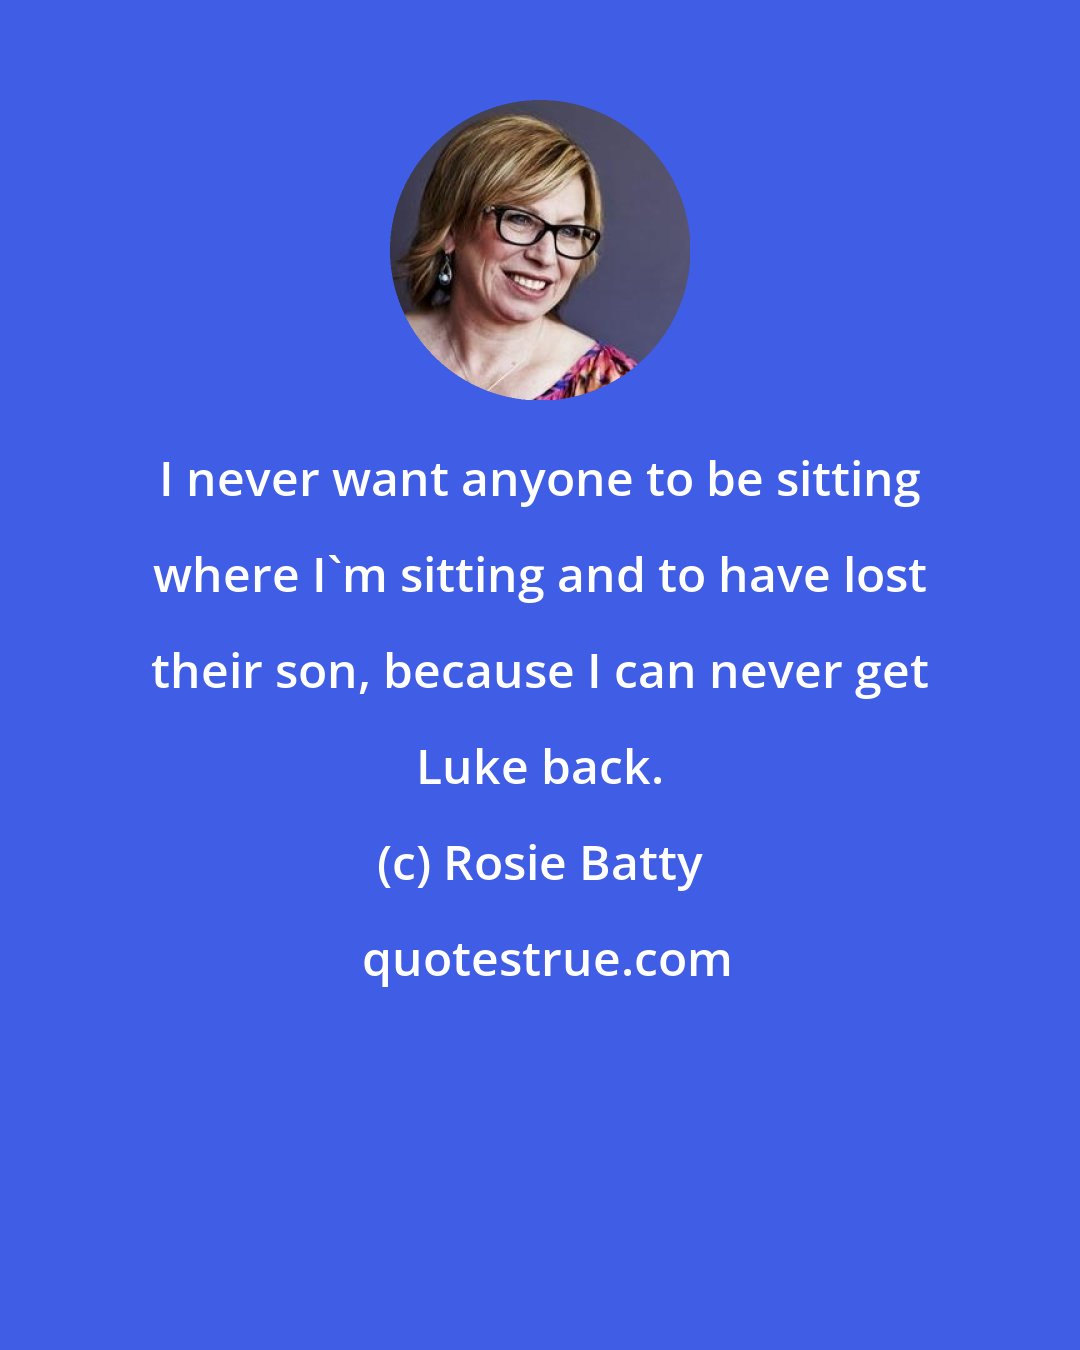 Rosie Batty: I never want anyone to be sitting where I'm sitting and to have lost their son, because I can never get Luke back.